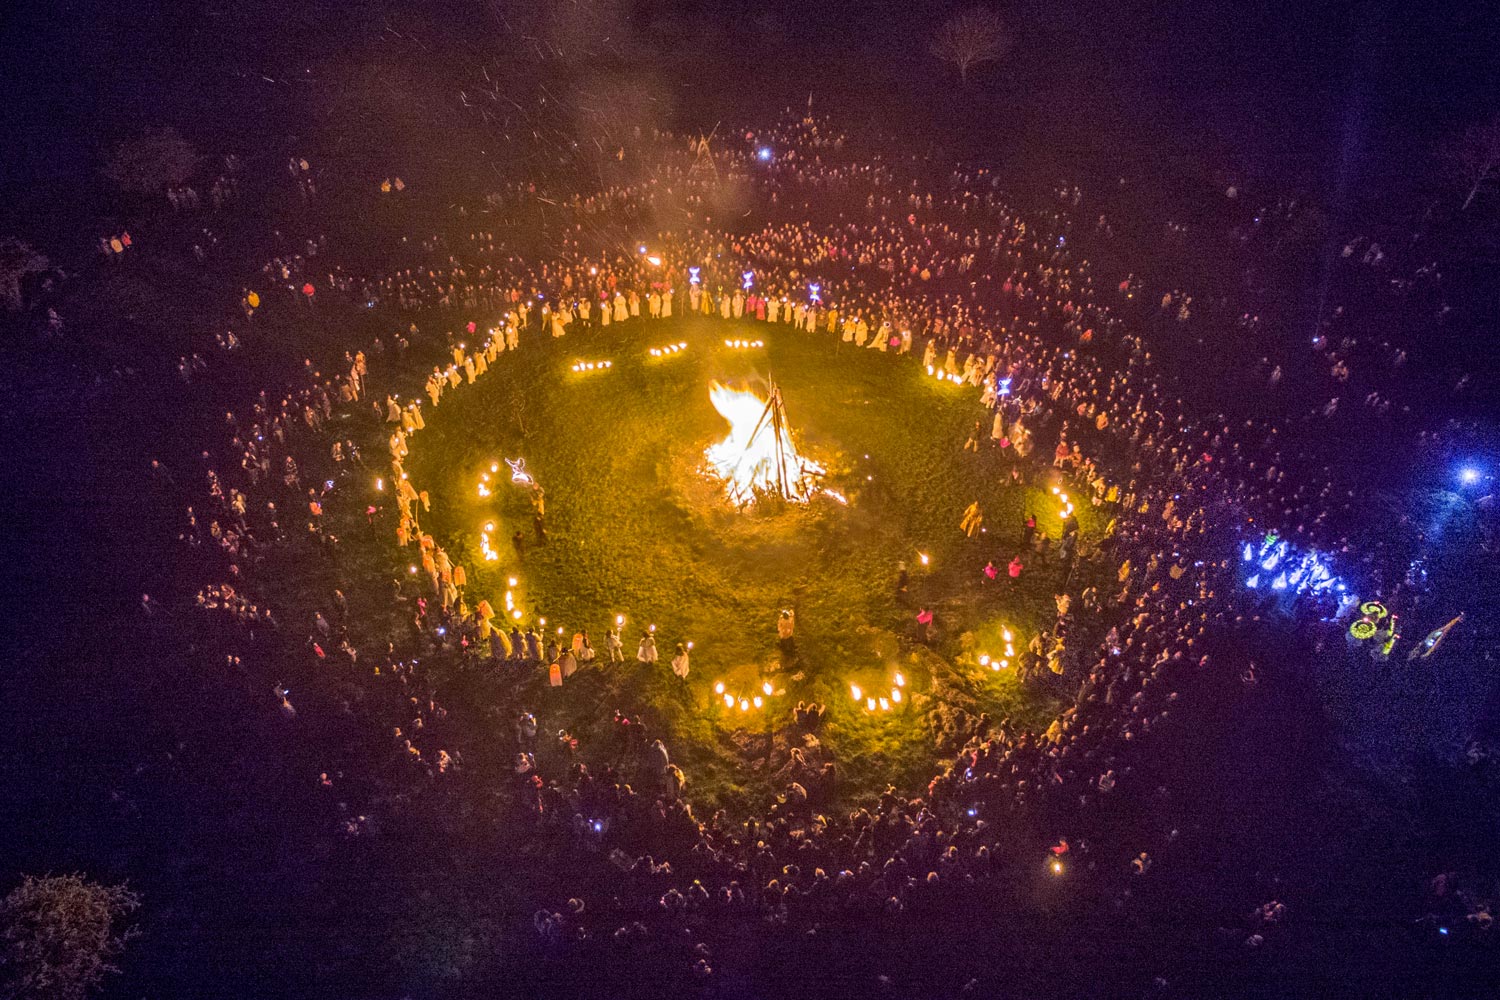 Bealtaine 2017 on the Hill of Uisneach where a great gathering took place celebrating our ancient heritage with lighting a great fire to welcome in the Summer.